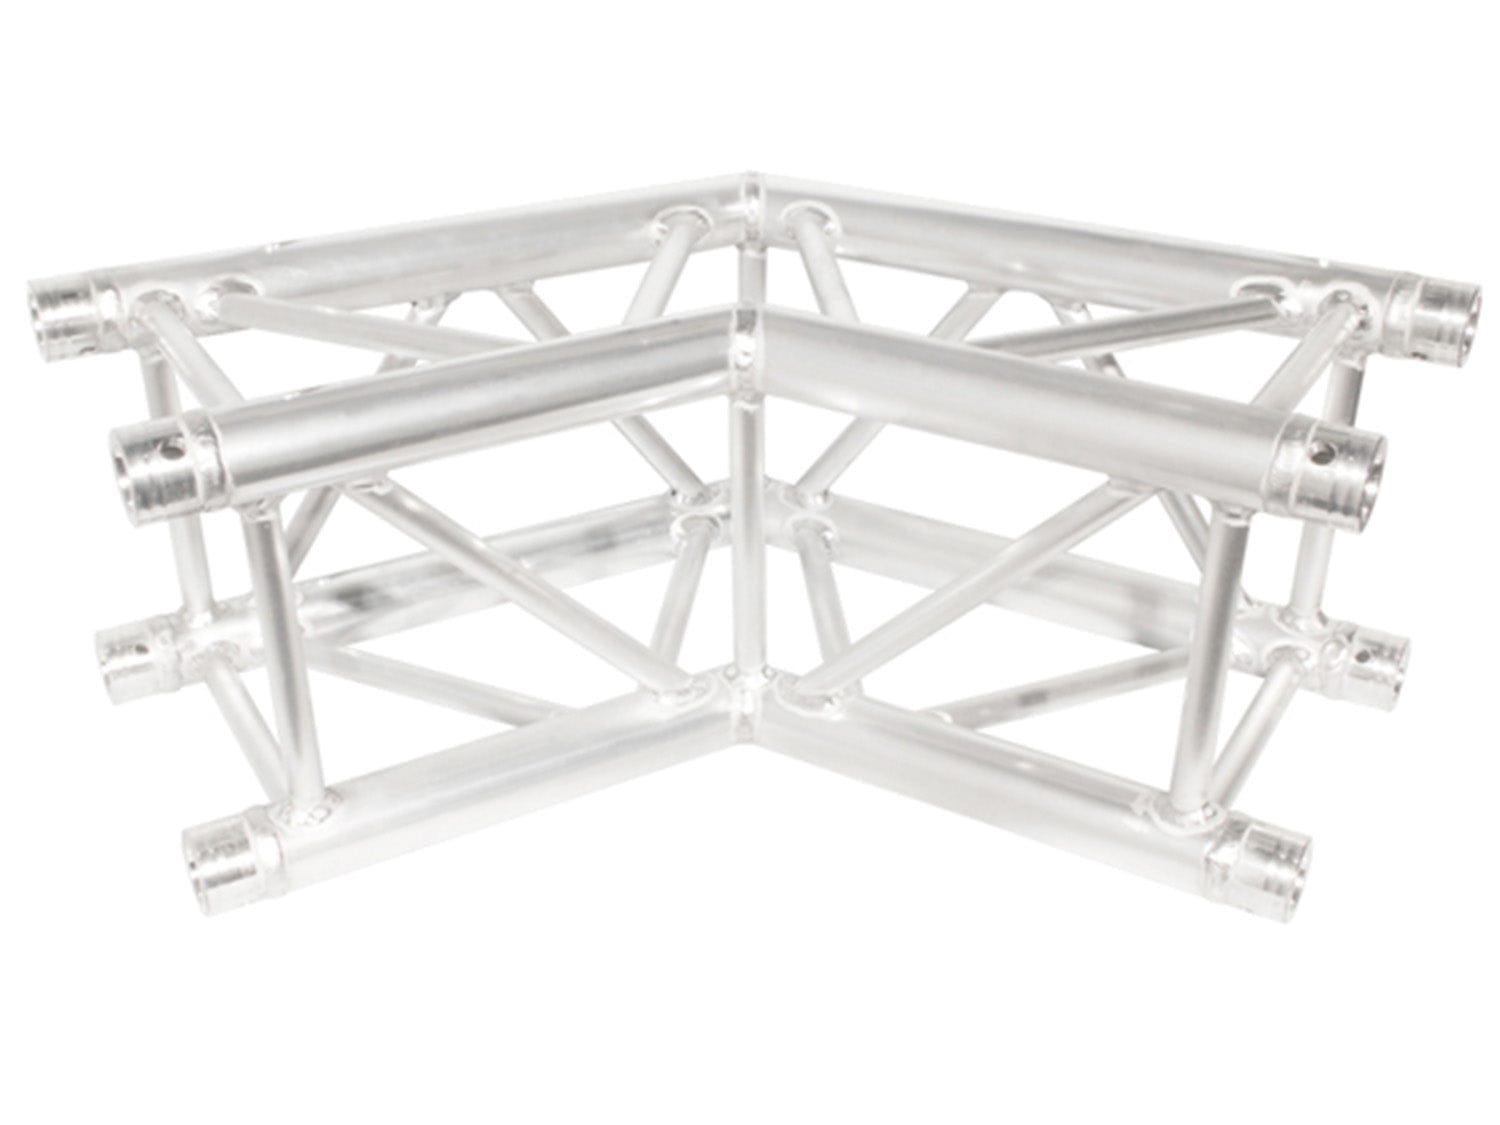 Chauvet Trusst CT290-4135C, 2-Way 135-Degree Corner for Truss Conical Connection - Hollywood DJ